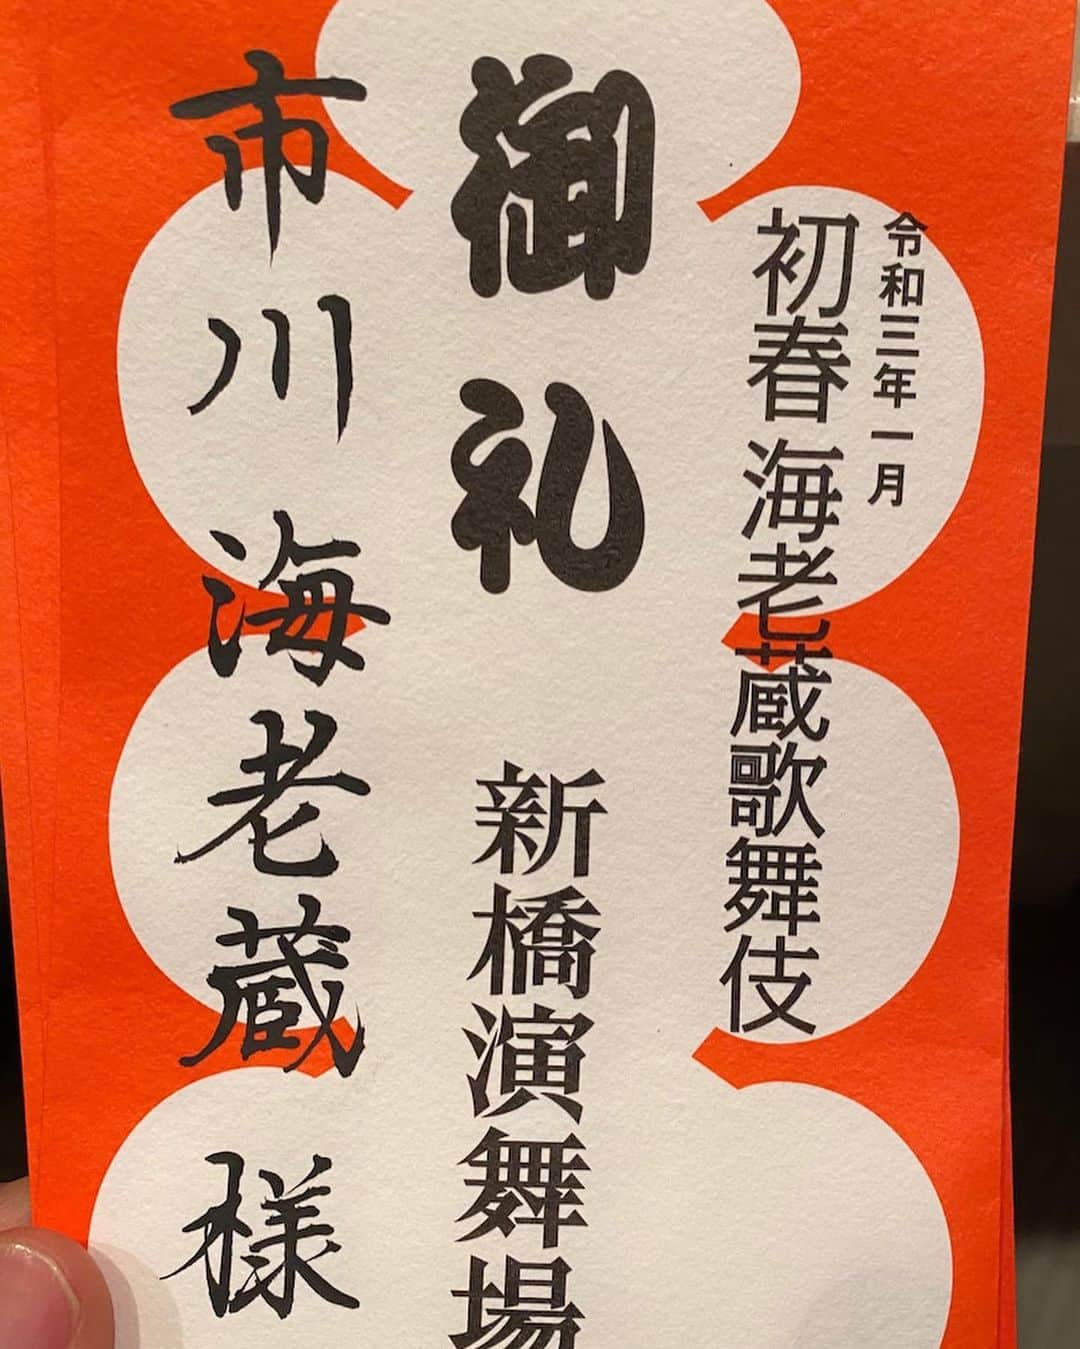 市川海老蔵 （11代目）さんのインスタグラム写真 - (市川海老蔵 （11代目）Instagram)「Offering “O-iri” envelope (bonus for a full house) that I received for this New Year’s performance to my house’s “kamidana” (a Shinto altar in homes)  Thank you all very much. I am relieved from the bottom of my heart for being able to finish the final performance yesterday of the Ebizo Kabuki without any problems.  Holding a performance under this circumstances with the spread of the novel coronavirus required so many cautions. Plus, it meant a lot that my children went through this without any troubles!  Whew I’m still feeling the relief now.  As this is a traditional culture, it is essential that the children go on stage. However there are some people who do not understand this, I feel that is so too.  However, it is important for them to earn experiences.  I believe this performance under the current situation with the novel coronavirus will remain in their memories for all of their lives.  Myself too.  And for the audiences too...  One message: Truly thank you very much.  I have a lot more to say but would like to end this message for now, * 大入りを神棚へ  ありがとうございます。 海老蔵歌舞伎 千穐楽を迎え 無事に昨日終わりまして 心から安心しました。  コロナ禍の中での興行は 気の使い方が違います。 そして 子供達も無事に走り抜けてくれた事も 大きい！  ほっ 未だにホッとしてます。  伝統文化ですから 子供達に舞台を踏ませる事は必須。 しかし世の中の方には理解してもらえない方もいる　 そりゃそうだ。  しかし 経験を積ませる事大切です。  二人にとっても コロナ禍での舞台は 一生の記憶に残るでしょう。  私も残ります。  そして 皆様の記憶にも、、  一言。 本当にありがとうございました。  まだまだありますが このくらいに、  #市川海老蔵 #海老蔵 #成田屋 #歌舞伎  #和 #日本文化 #ABKAI #ABMORI #ebizoichikawa #ebizo #kabuki #kabukiza #thunderparty #ebizotv #theater #theaterarts #actor #japan #classic  #kabukiactor」1月18日 9時51分 - ebizoichikawa.ebizoichikawa